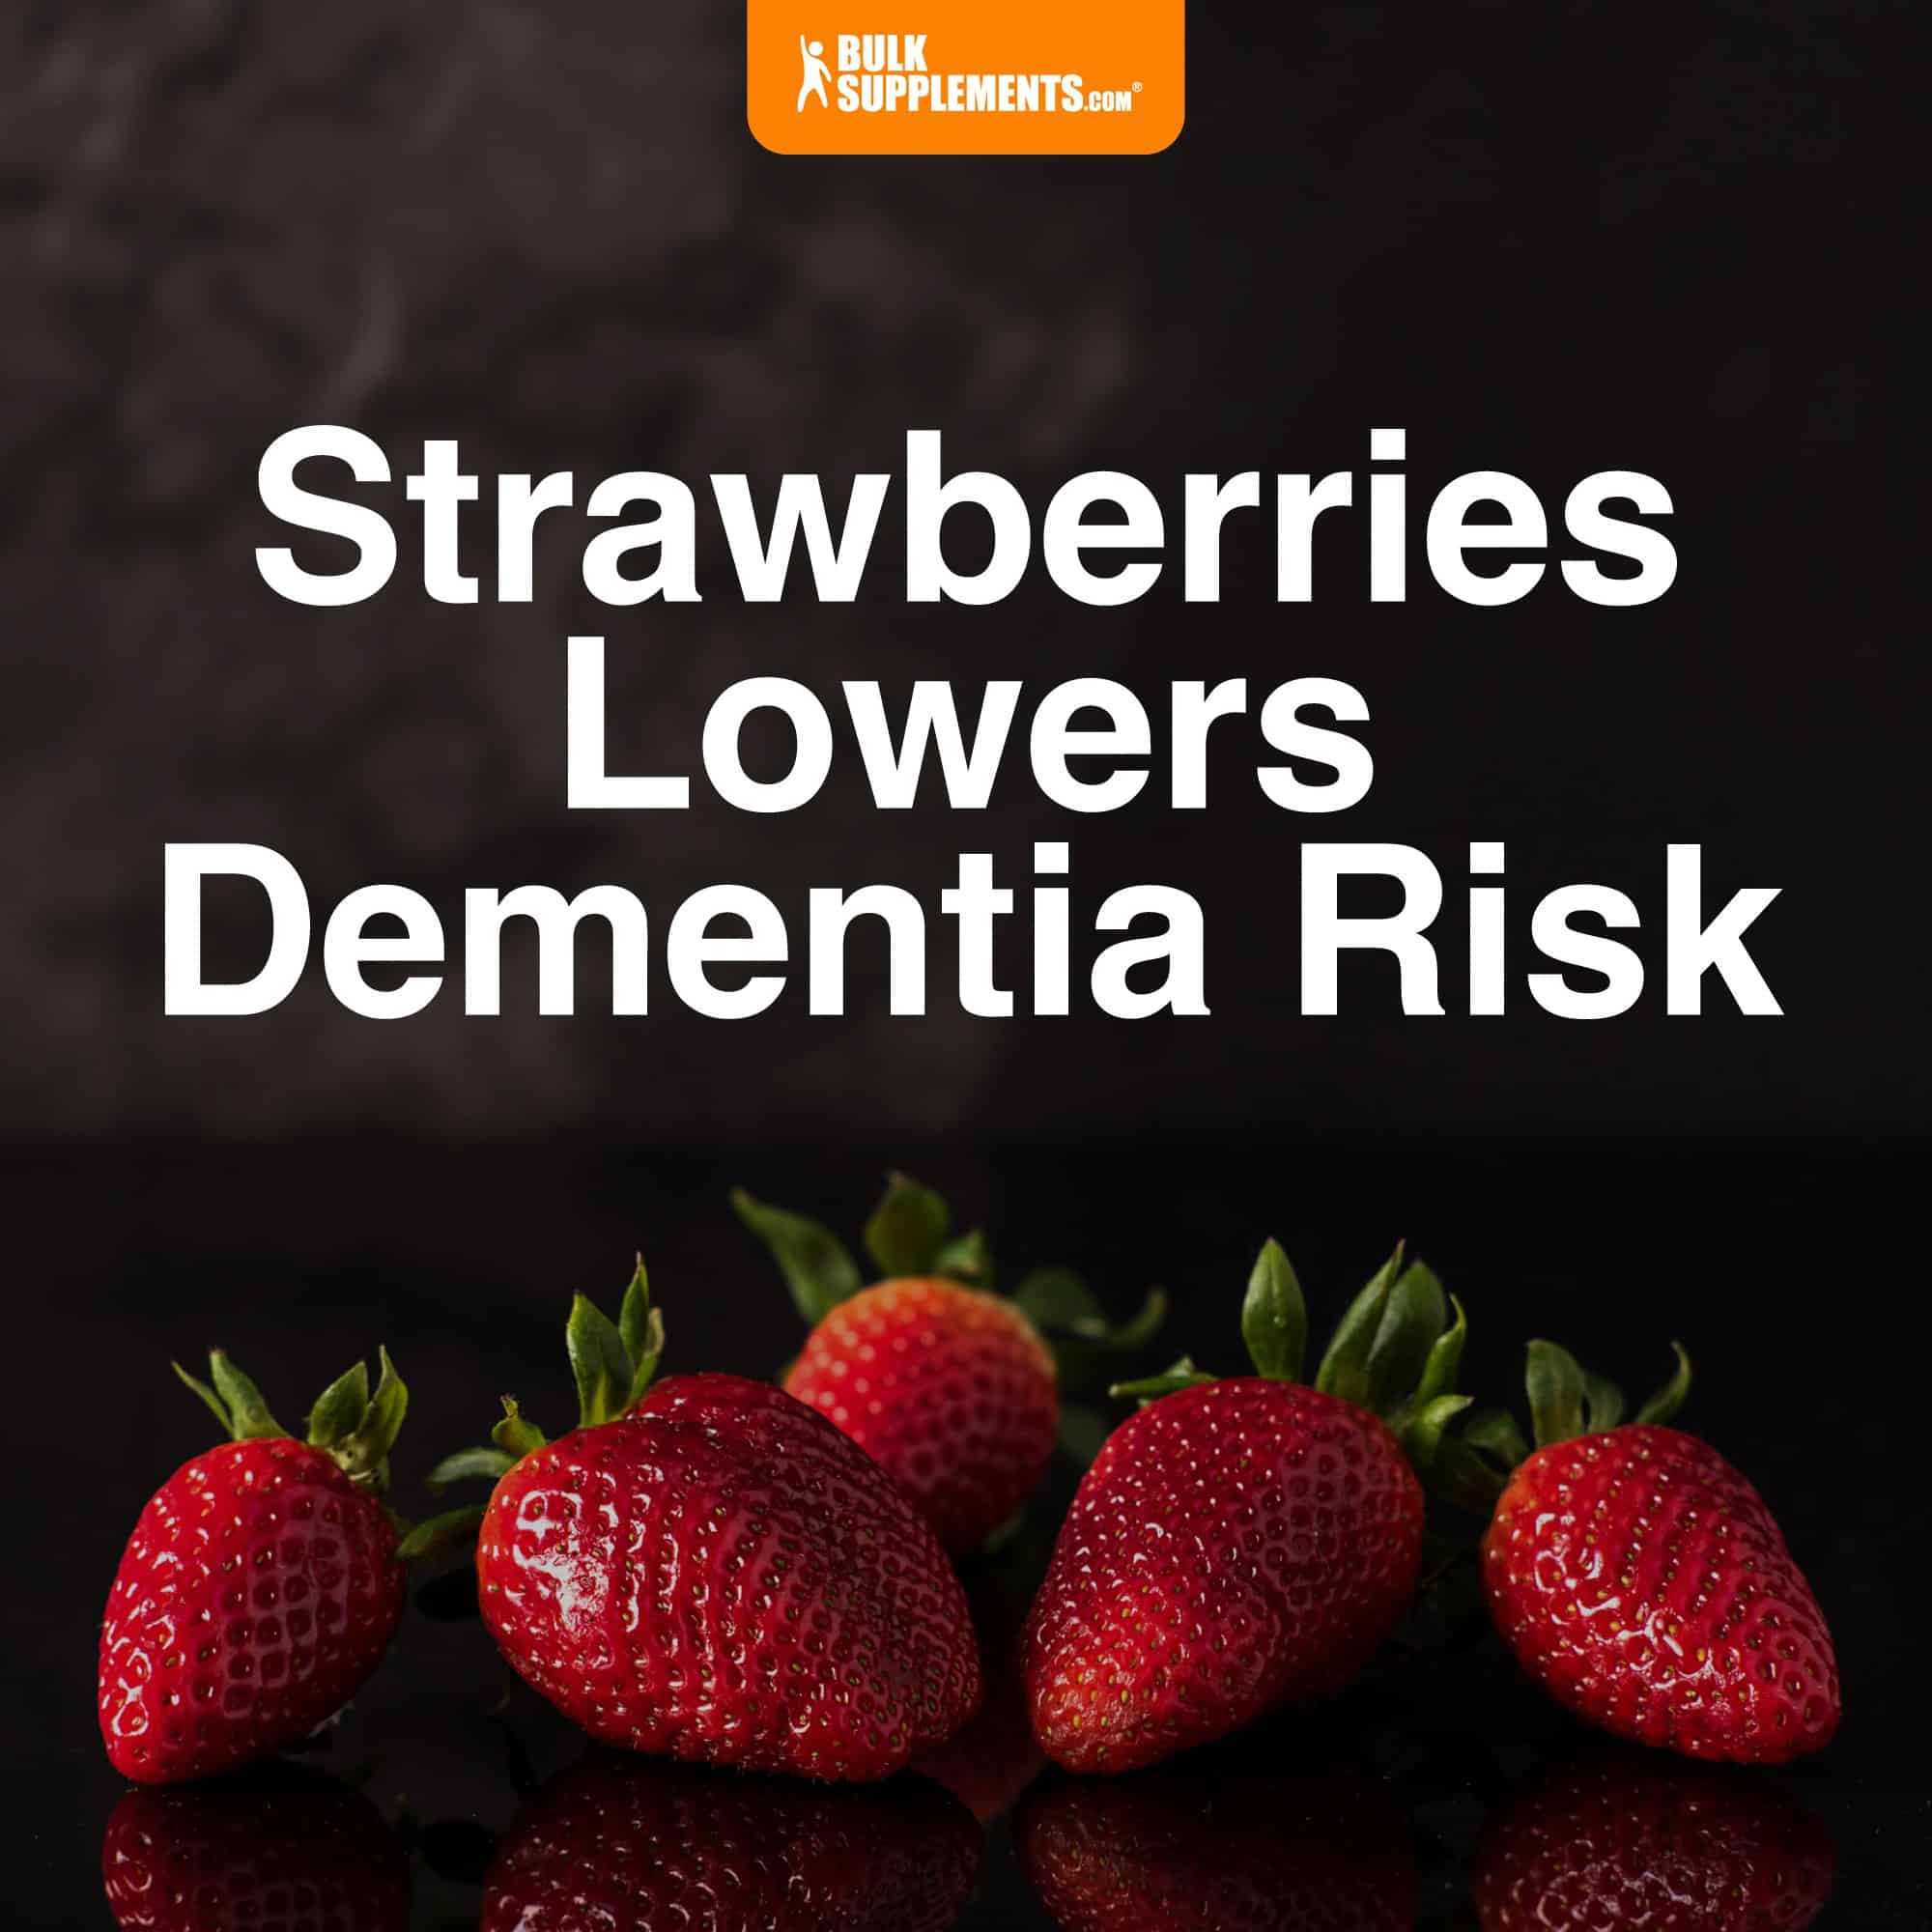 Strawberry Consumption Reduces Risk of Dementia, New Study Suggests